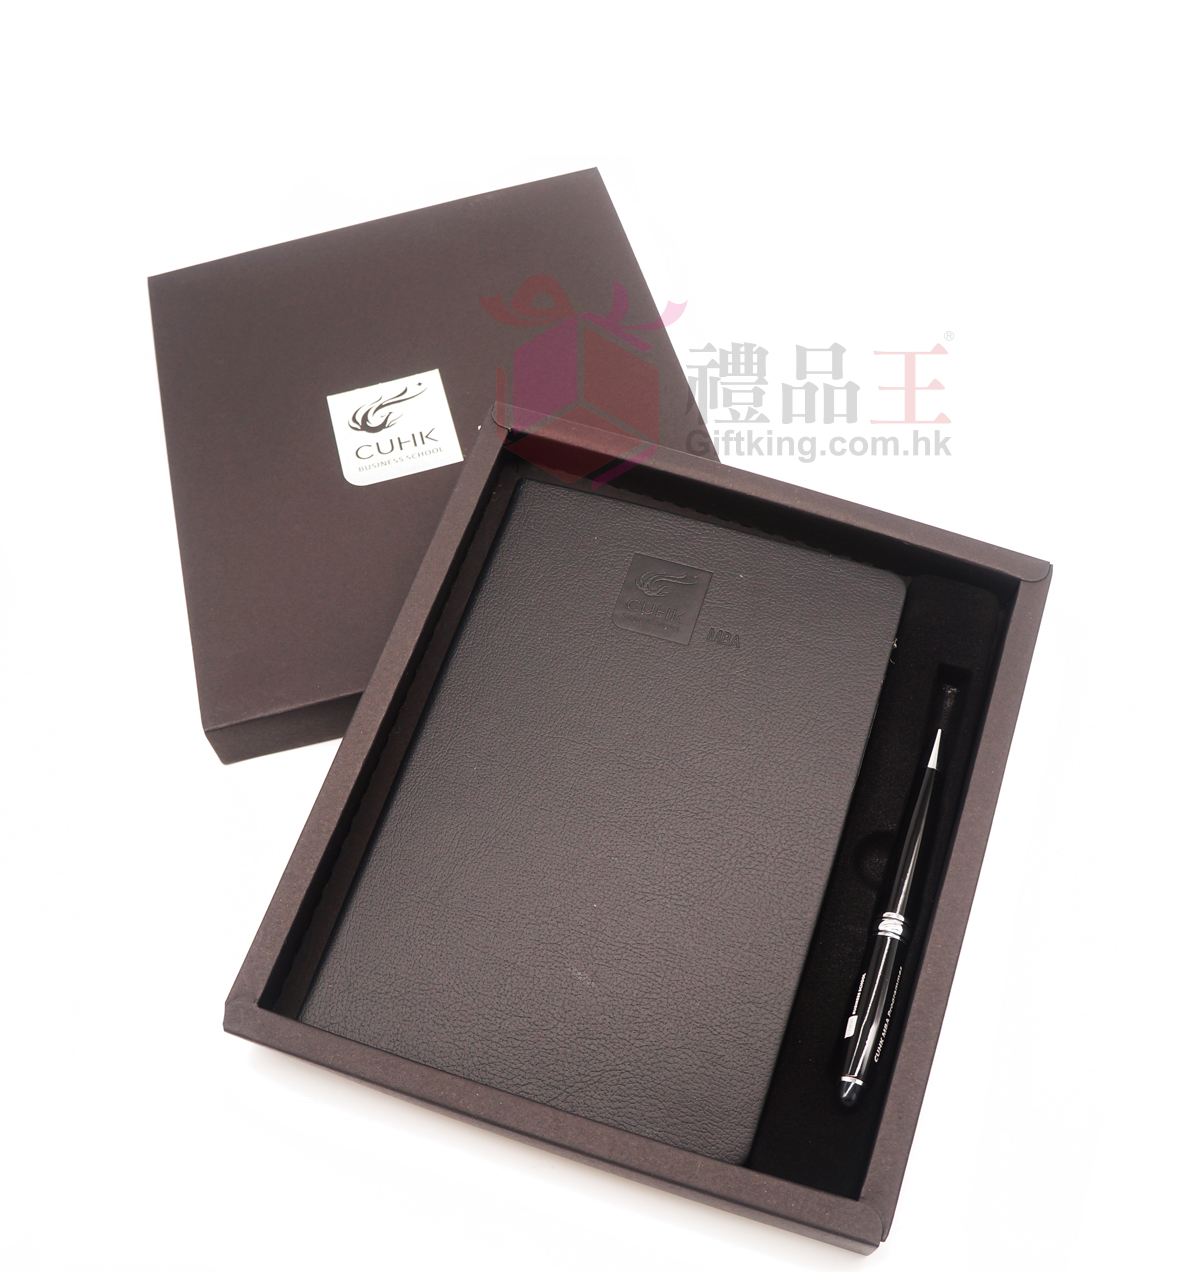 The Chinese University of Hong Kong Business School Stationery Set (Business Gifts)